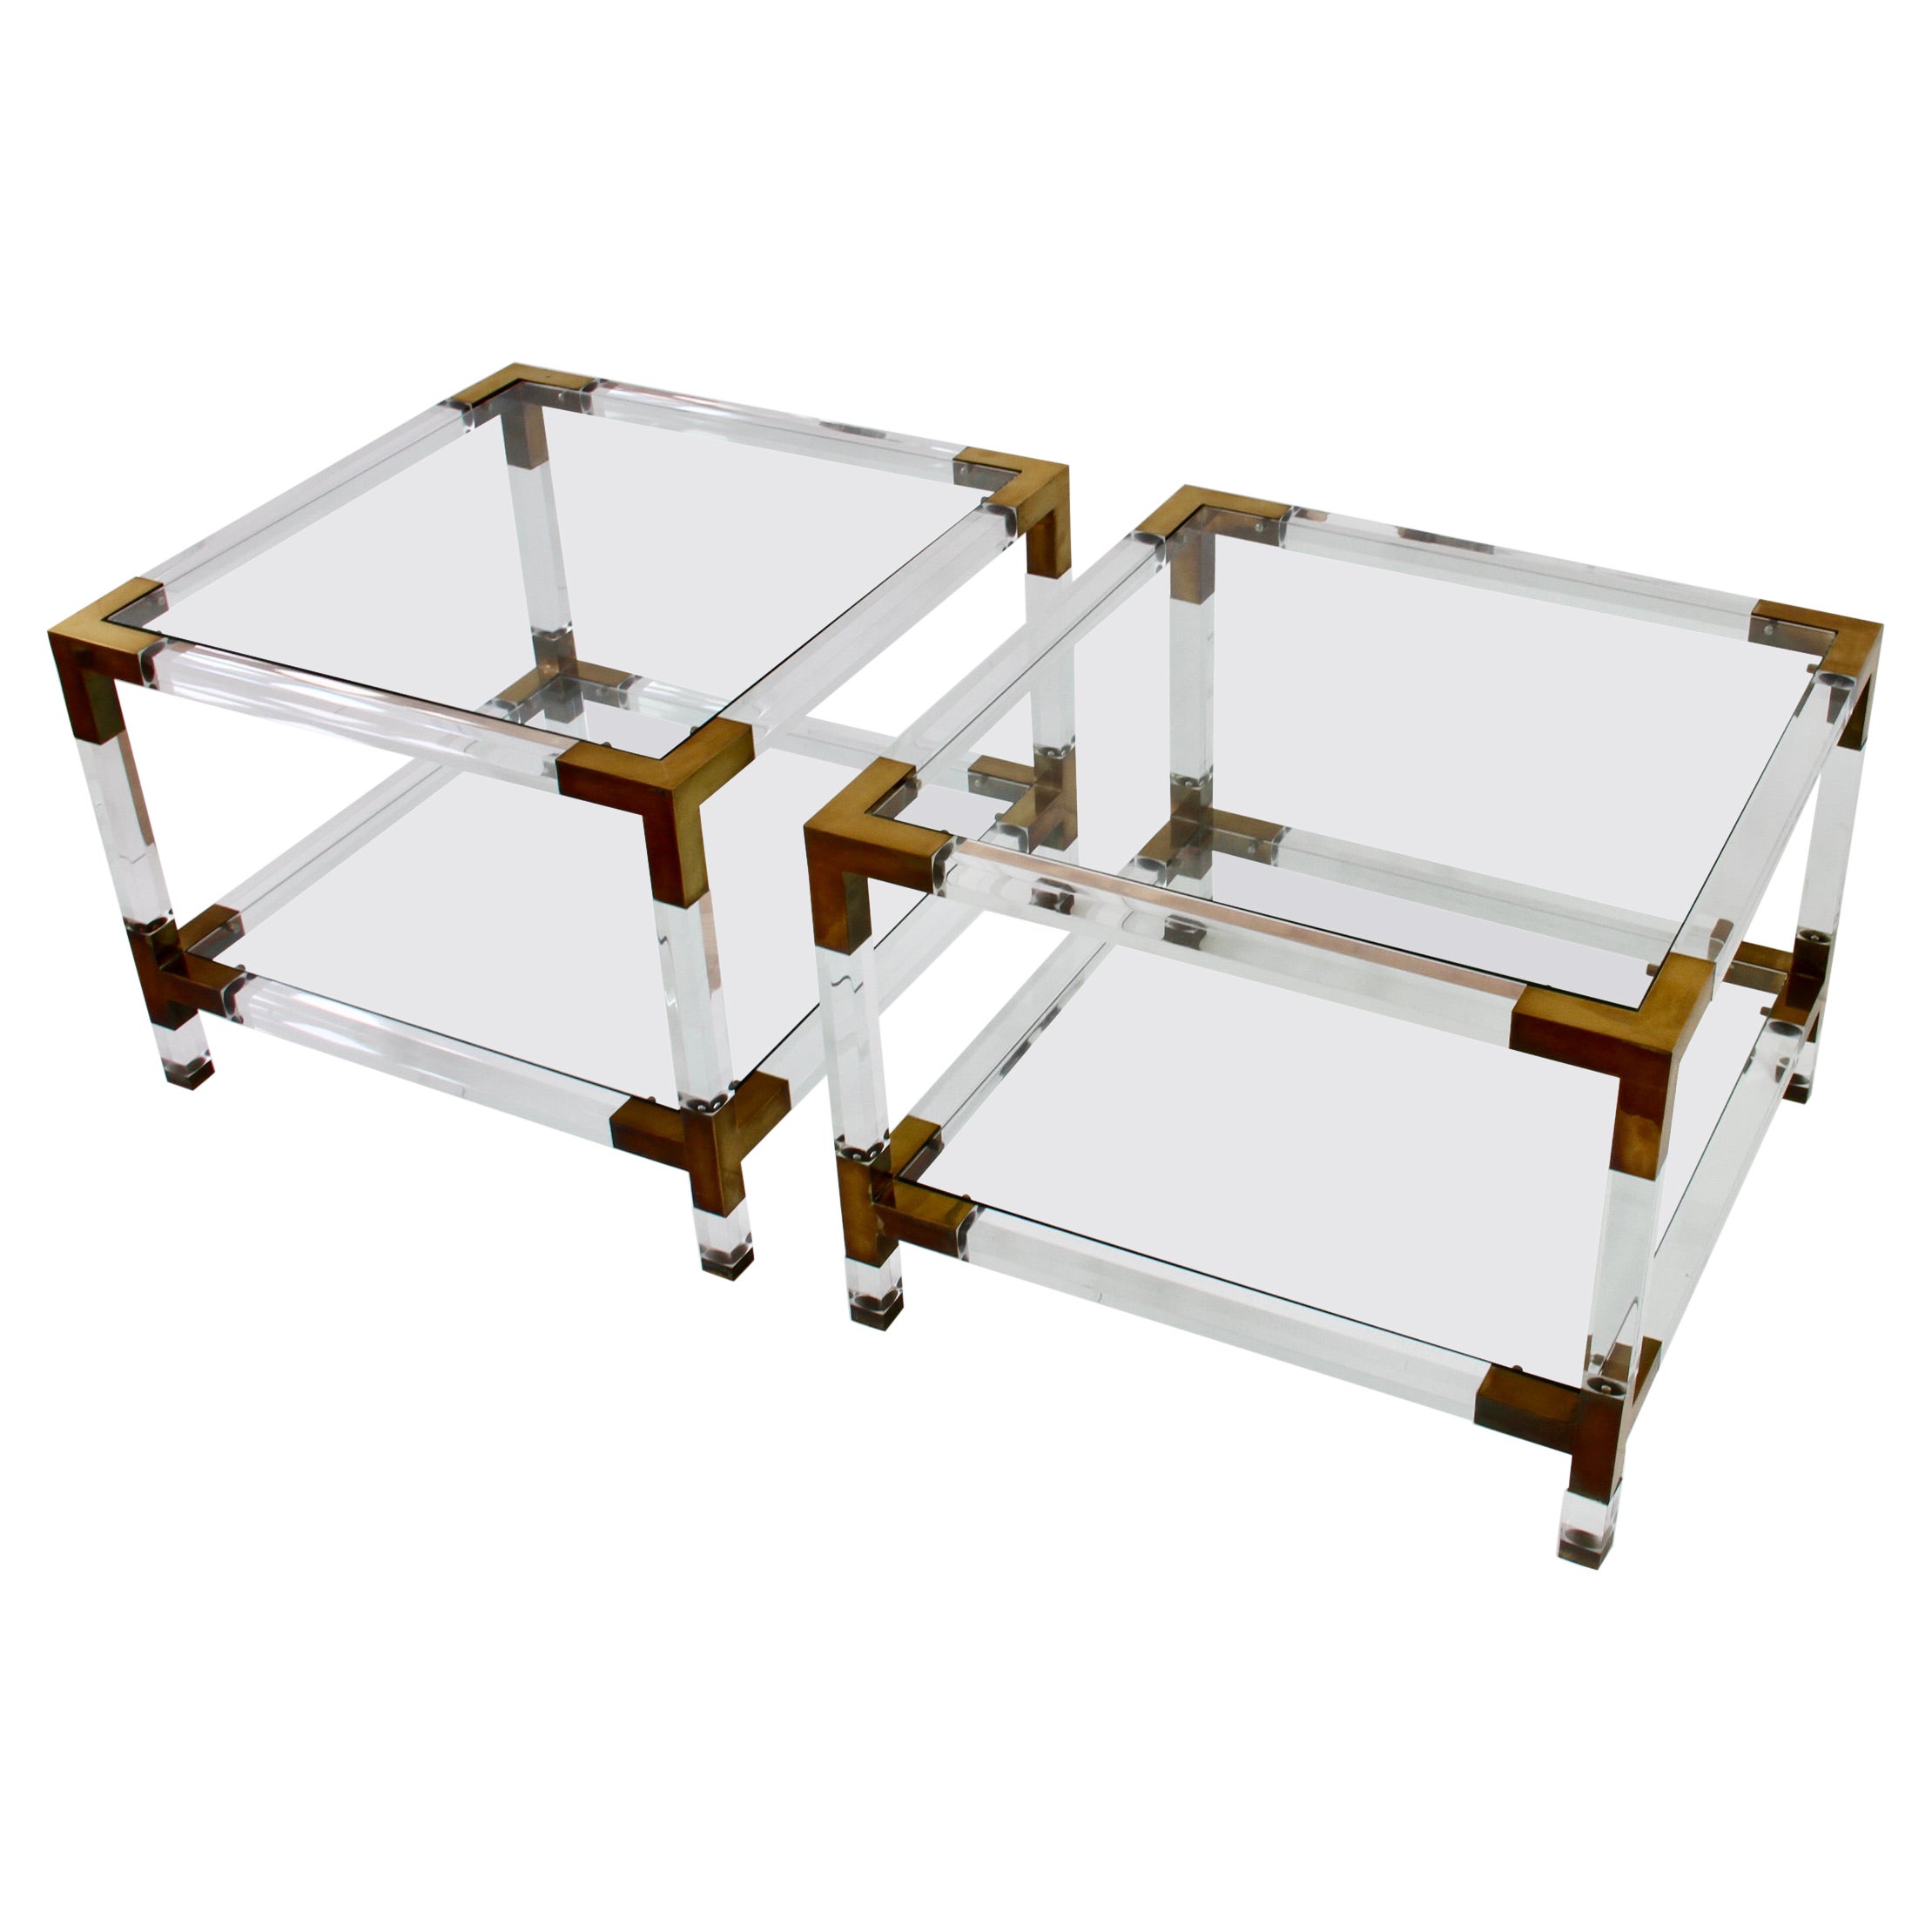 Pair of Hollis Jones Style Vintage Acrylic/Lucite Brass Side Tables, circa 1970s For Sale